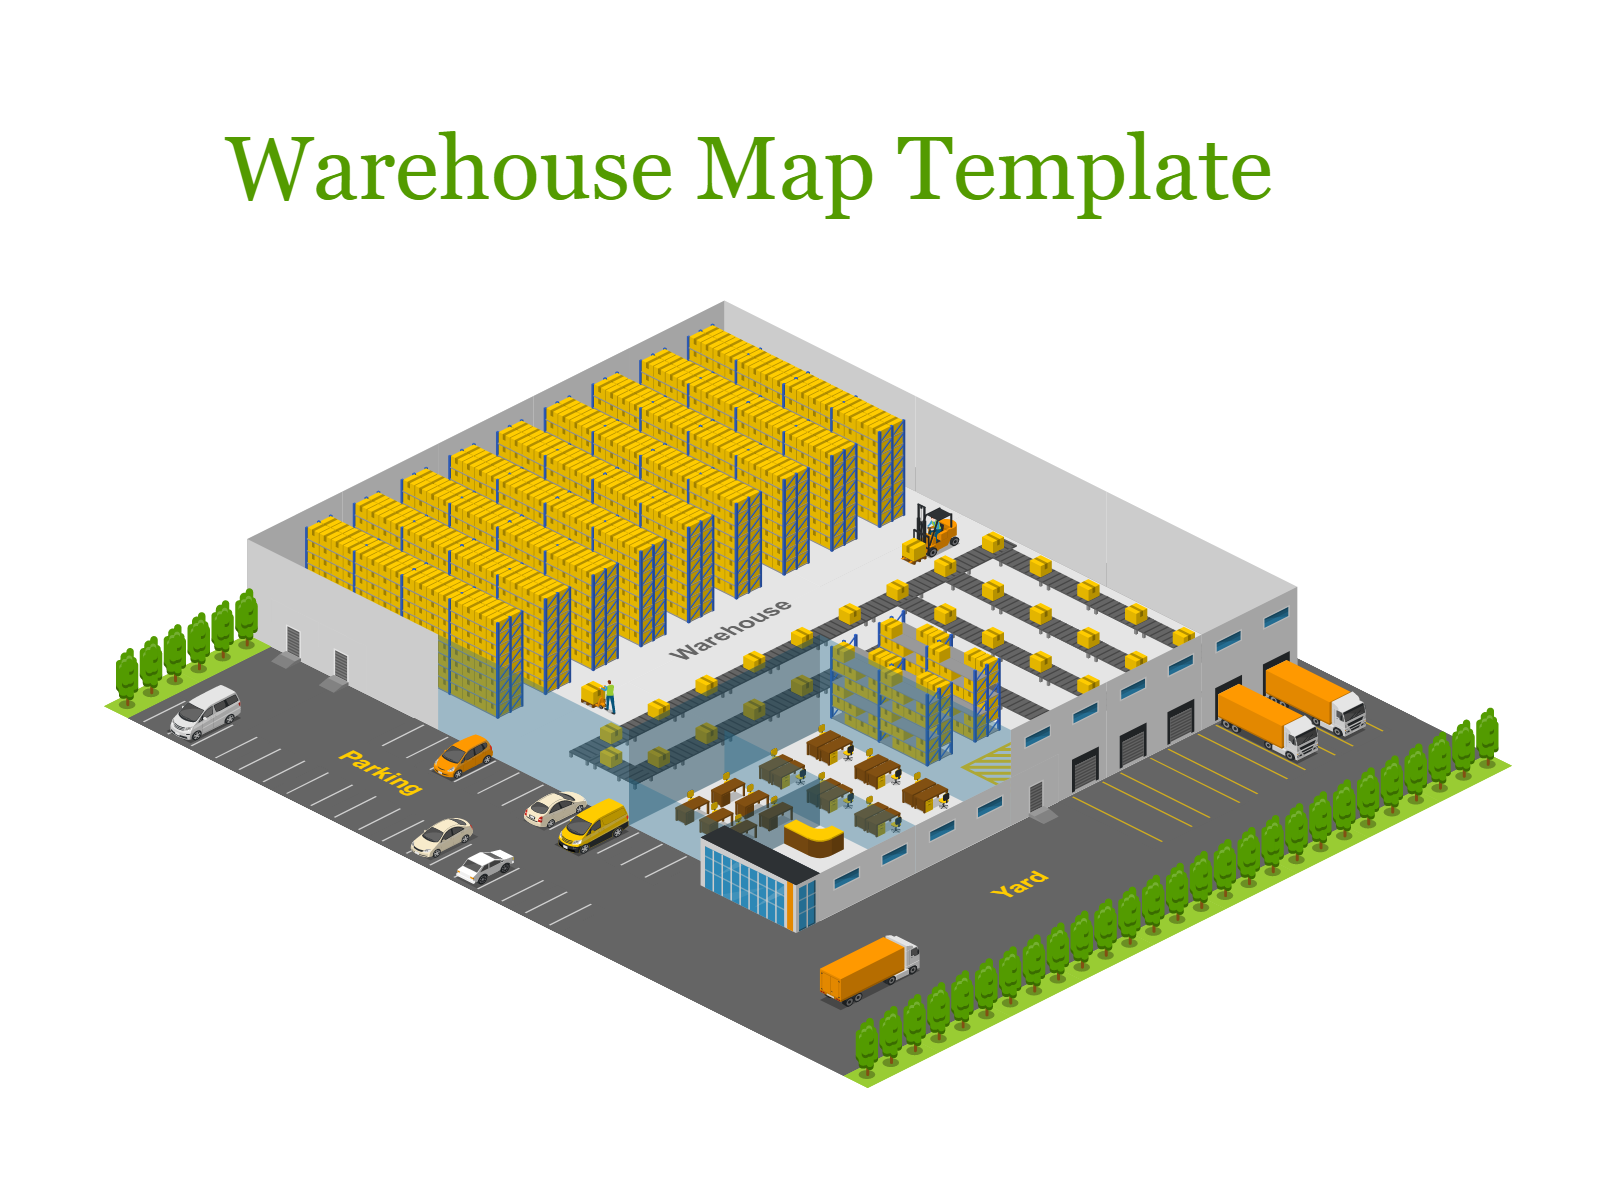 Warehouse Map Template by Icograms on Dribbble